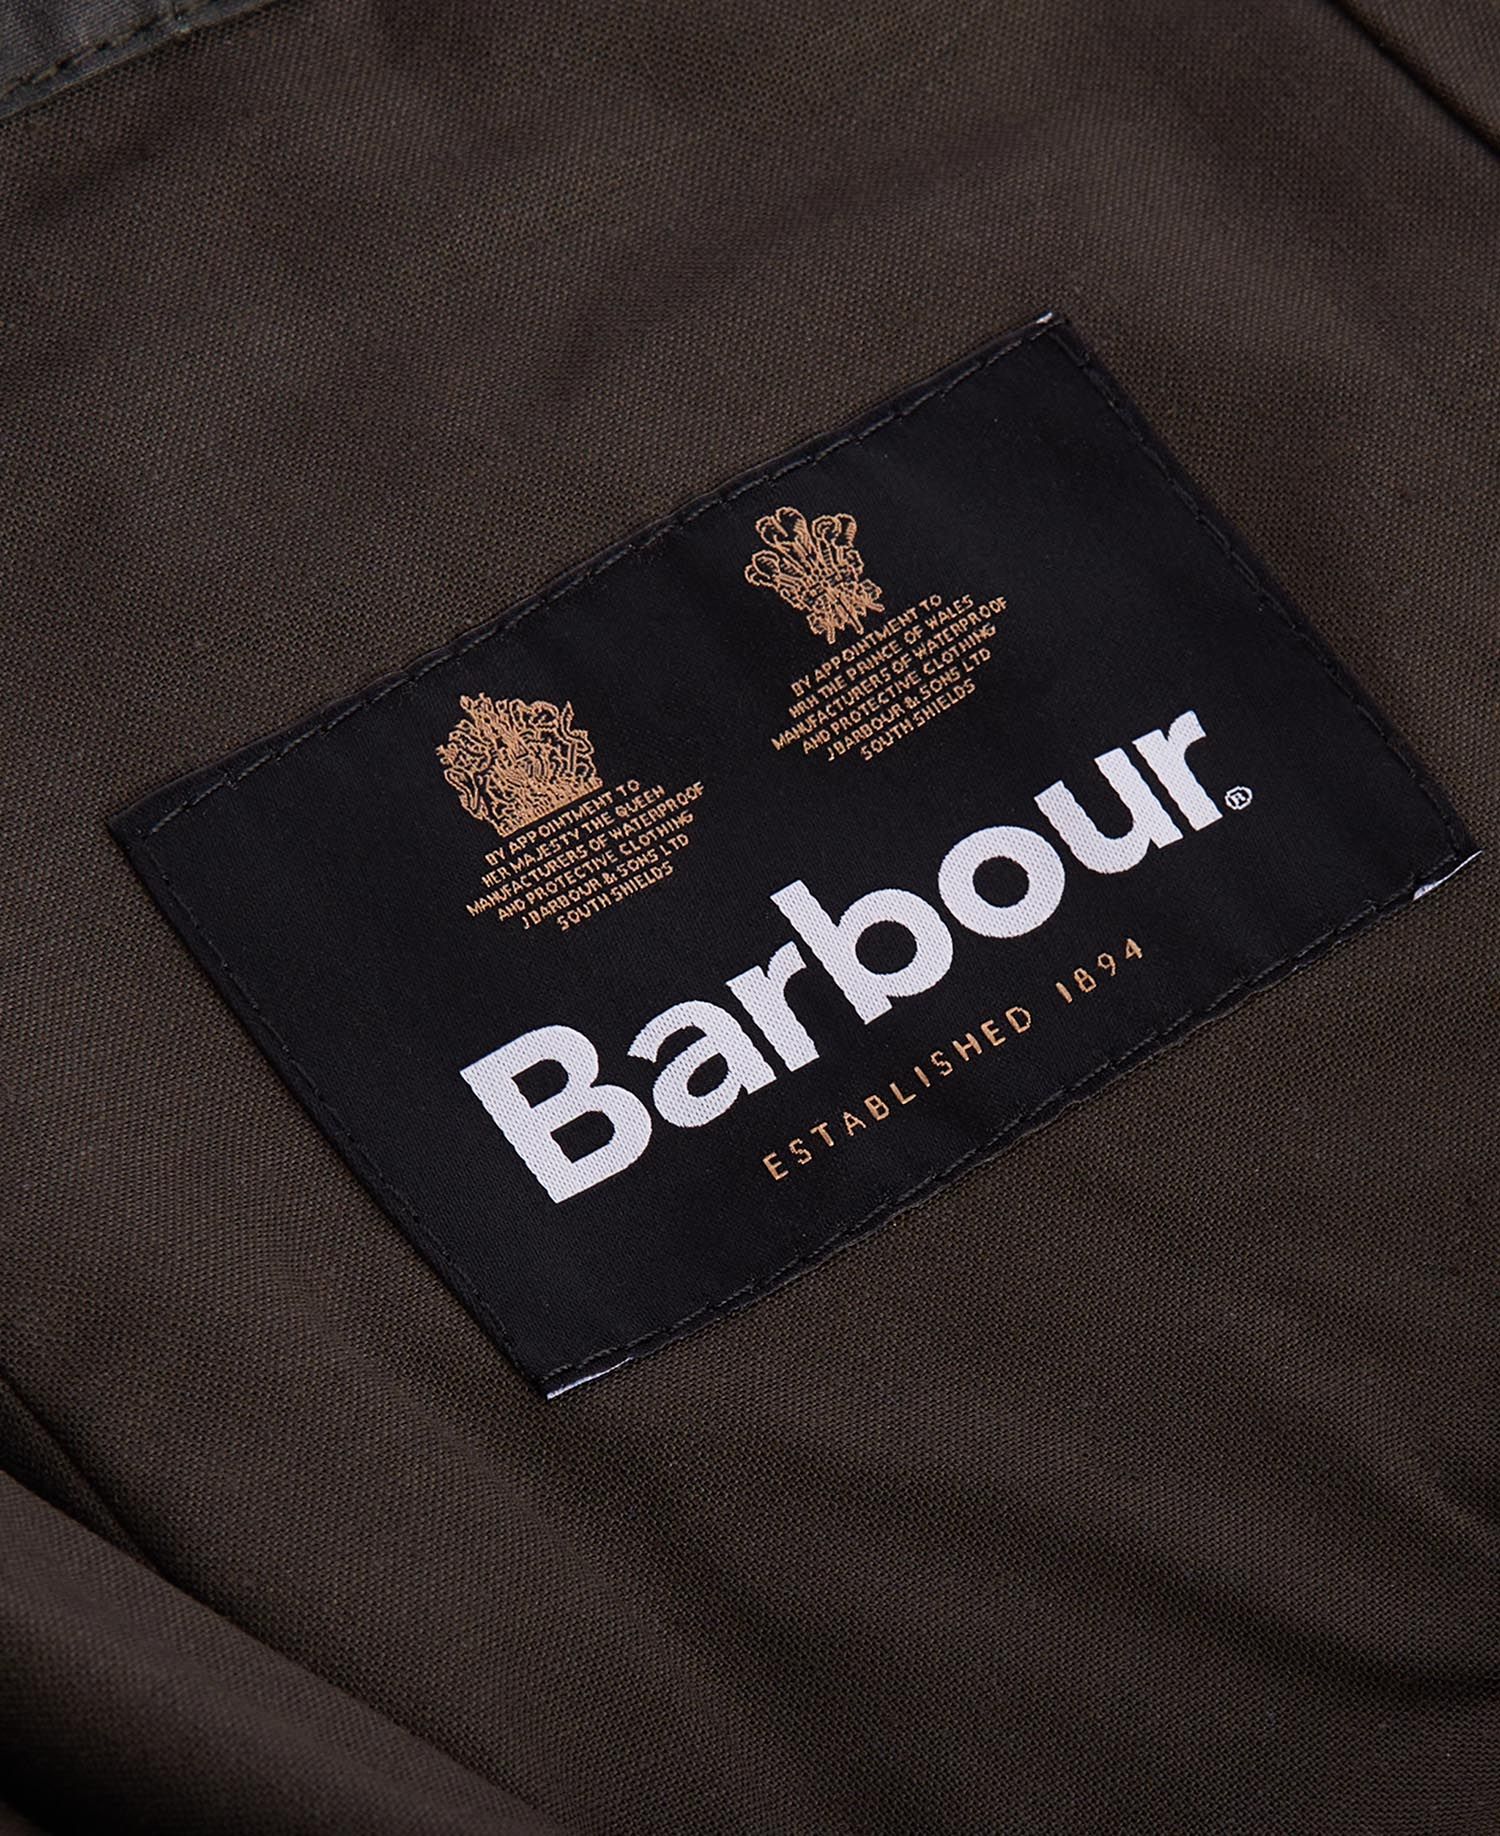 Barbour Waxed Cotton Plain Hood in Sage | Barbour